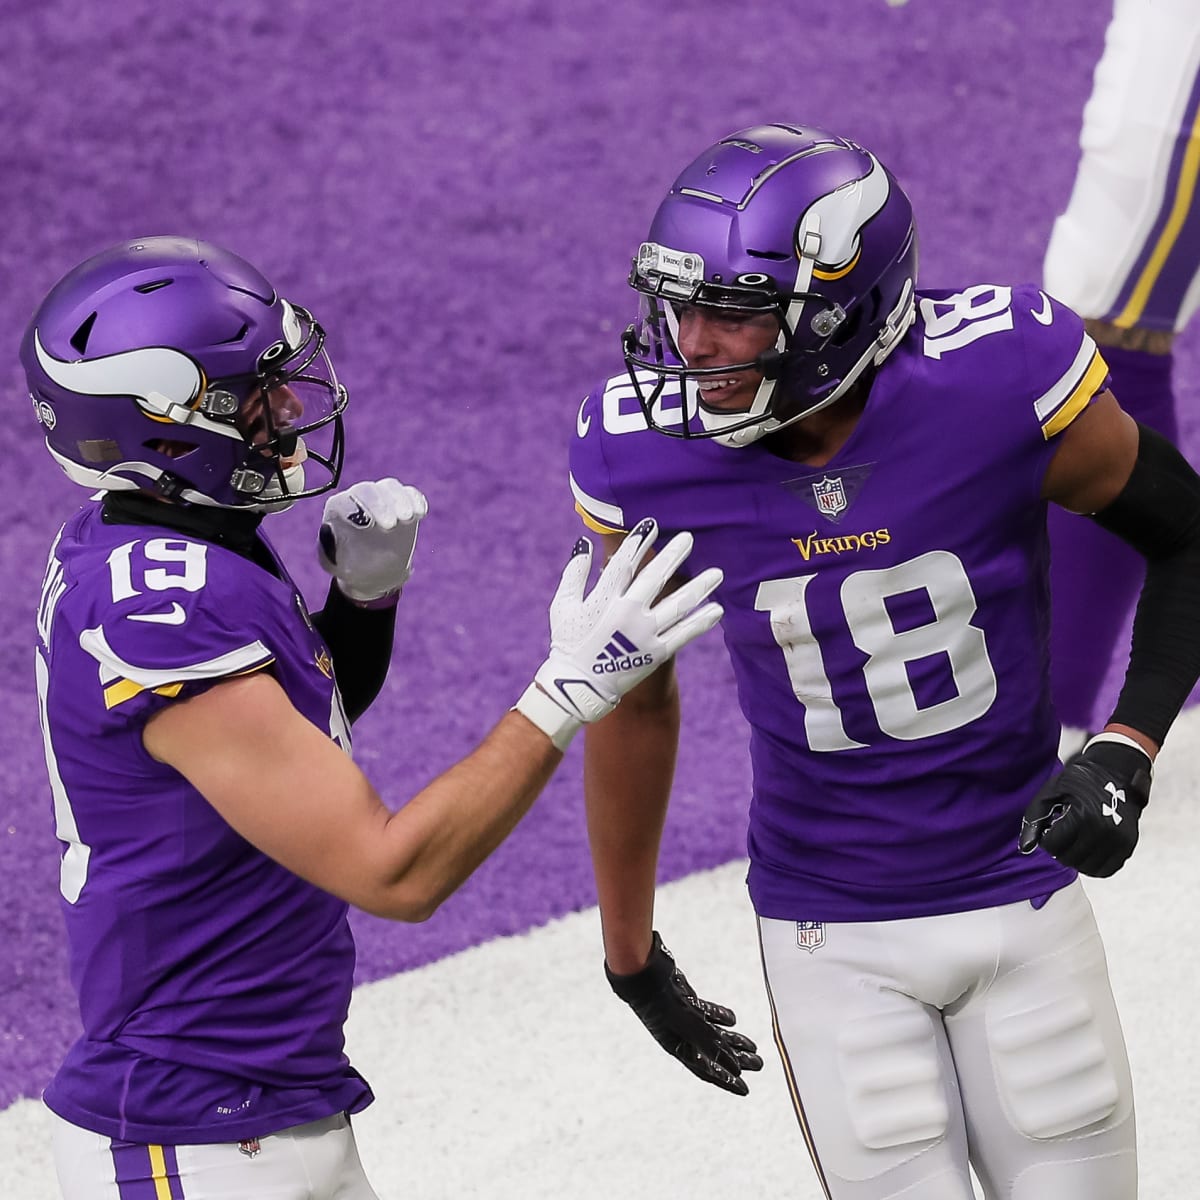 Productie Vlek Rally Ranking the top five wide receiver duos in the NFL: where do the Vikings'  Jefferson and Thielen fall? - Sports Illustrated Minnesota Vikings News,  Analysis and More